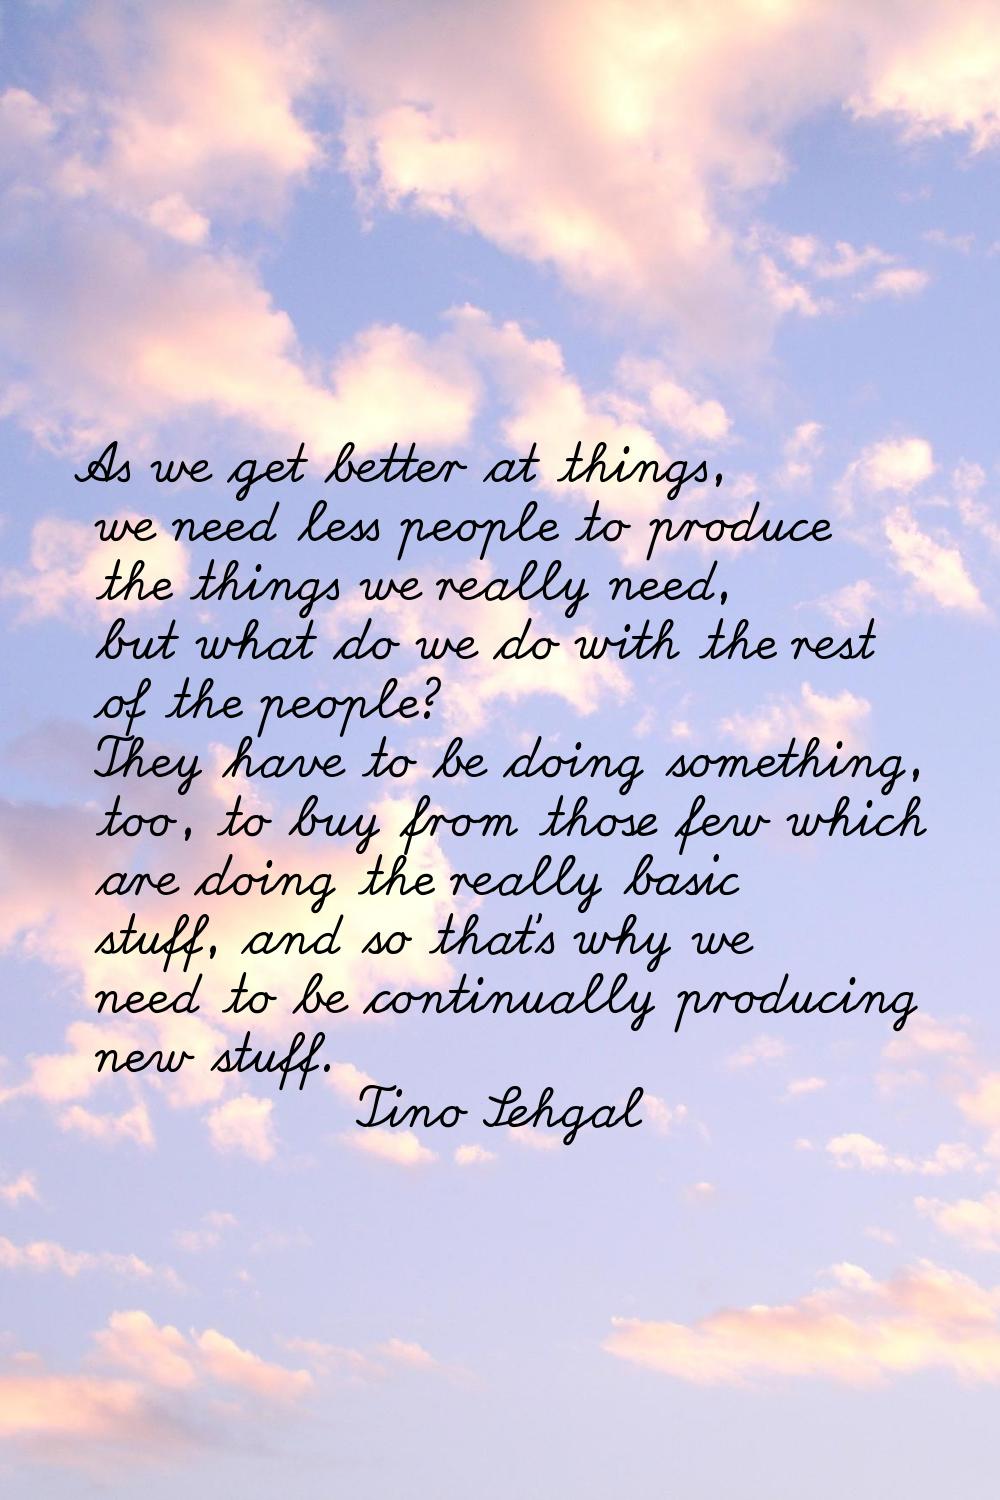 As we get better at things, we need less people to produce the things we really need, but what do w